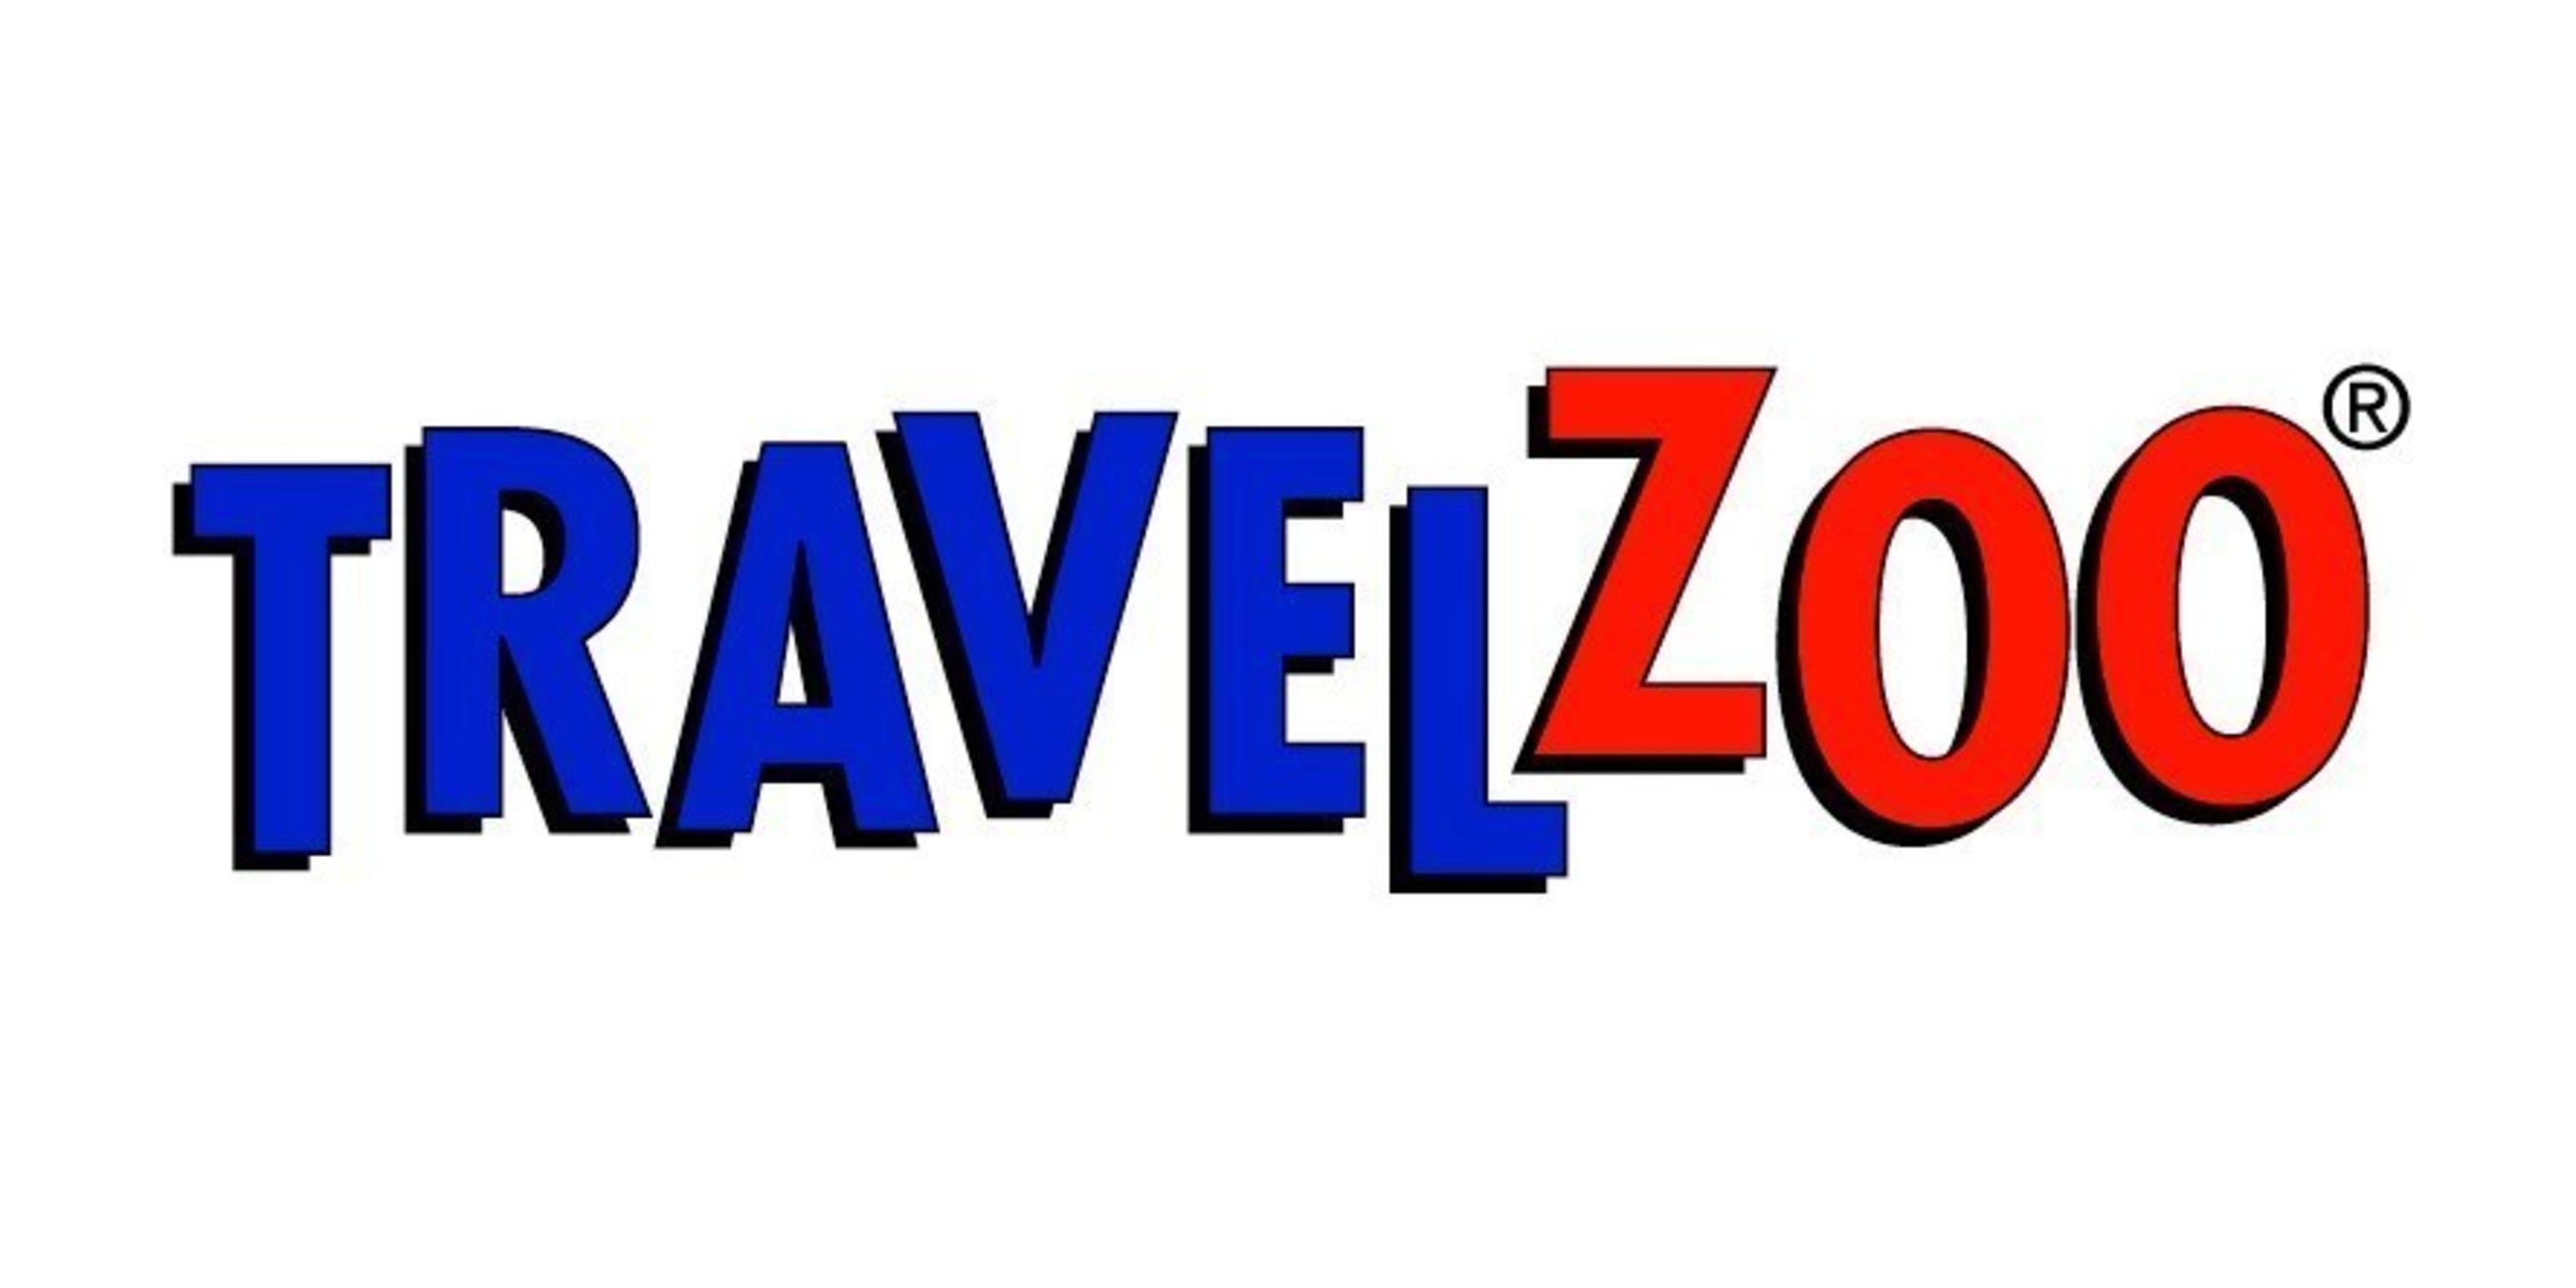 Travelzoo Coupons & Promo Codes